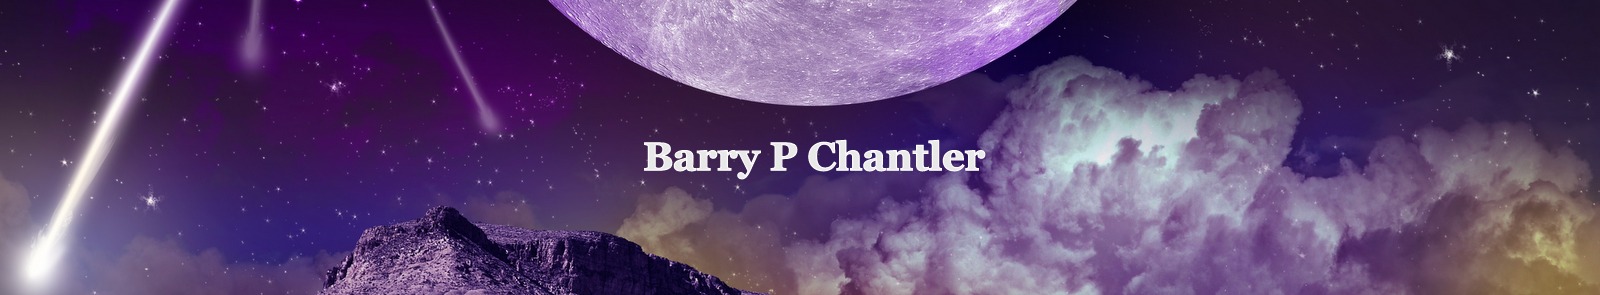 Protector of The Word by Barry P Chantler